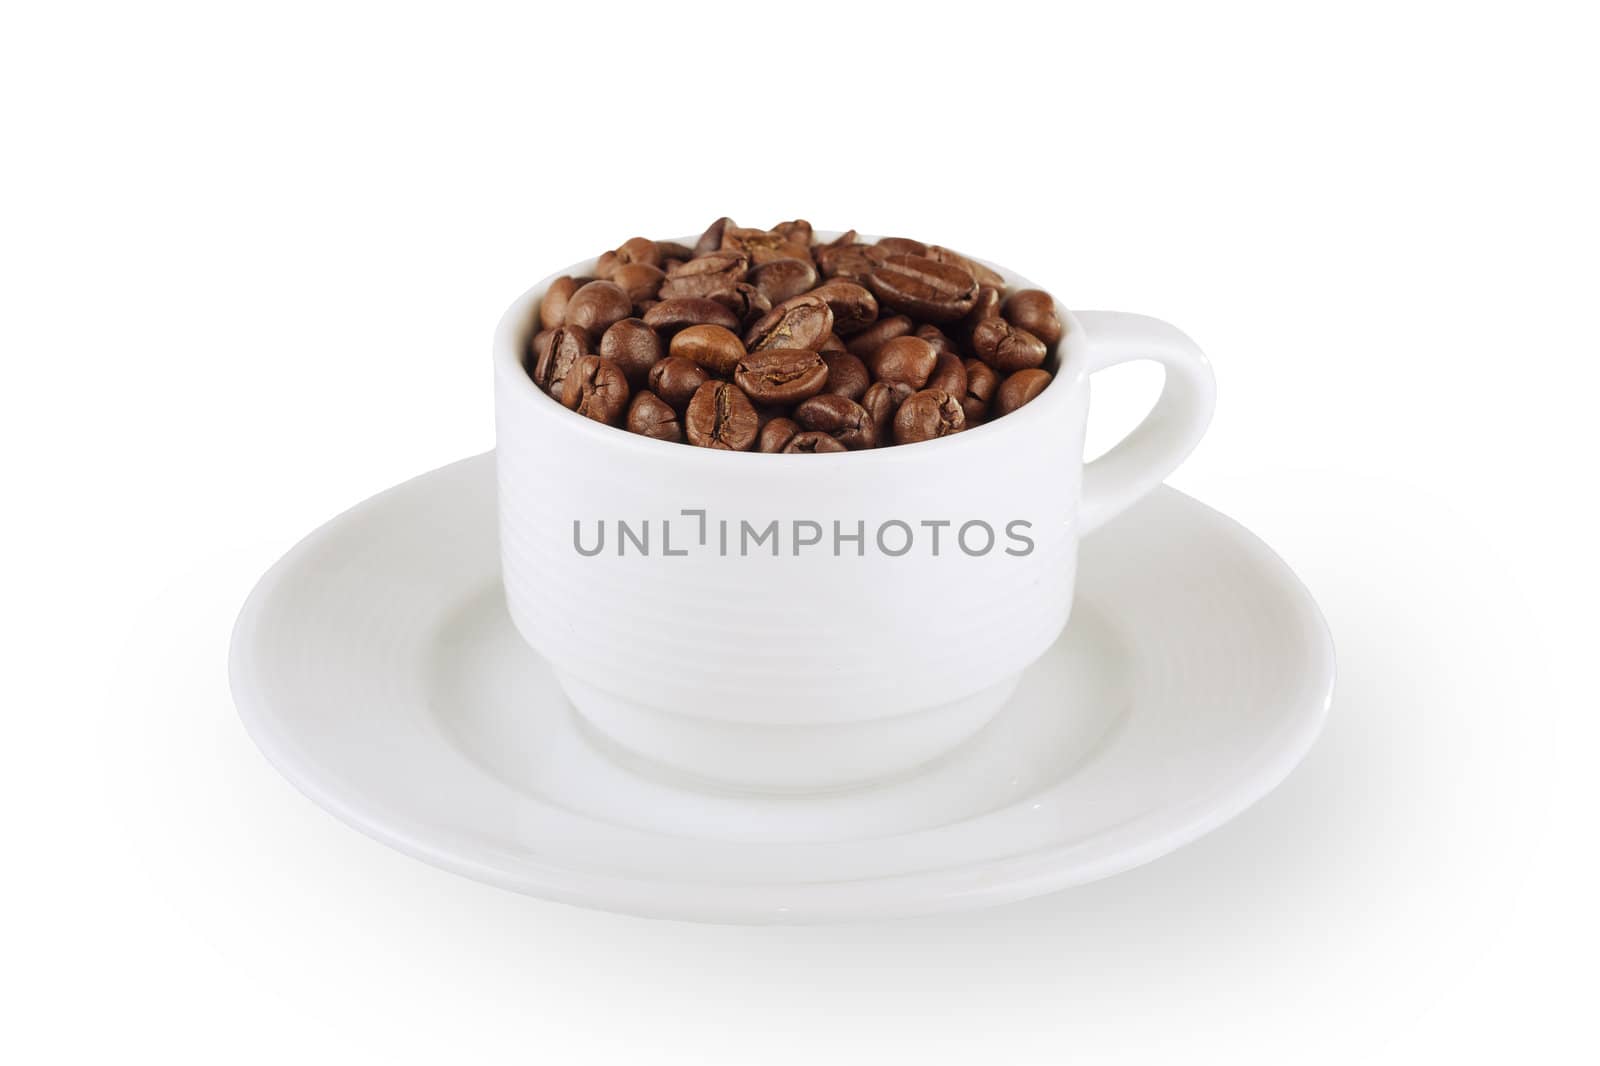 cap of coffee beans by JazzManZZ